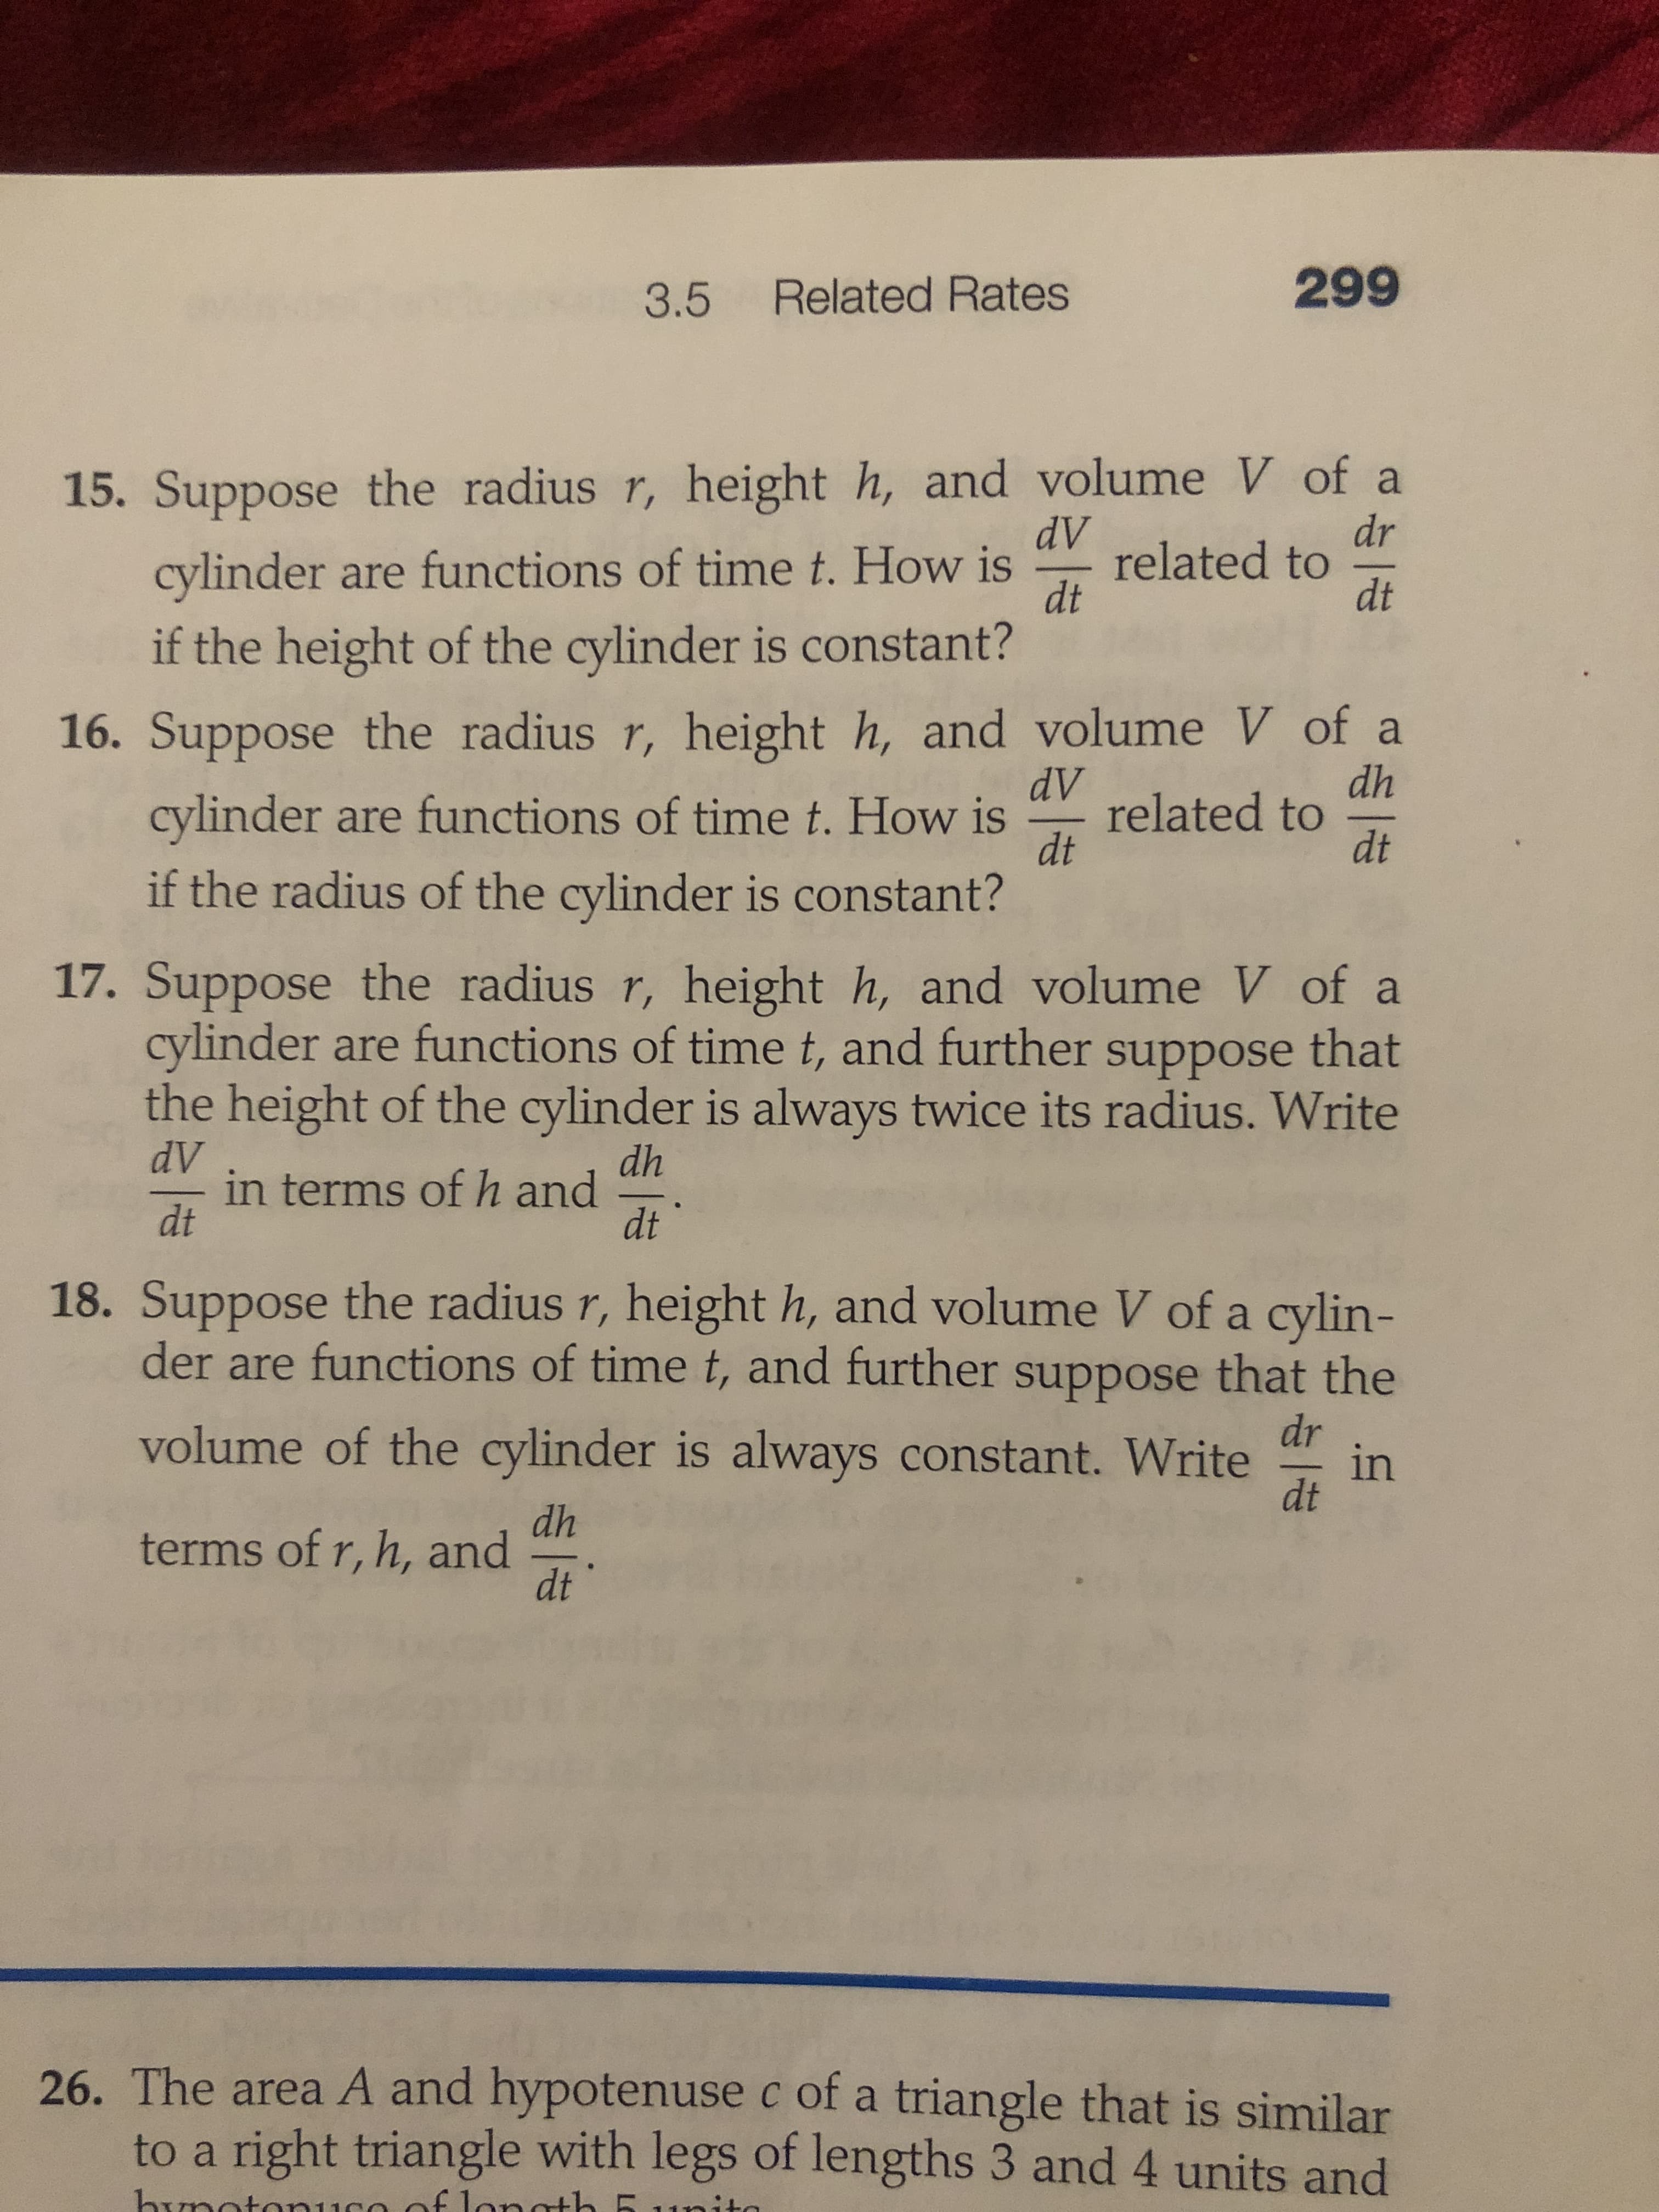 17. Suppose the radius r, height h, and volume V of a
cylinder are functions of time t, and further suppose that
the height of the cylinder is always twice its radius. Write
dV
in terms of h and
dt
dh
dt
